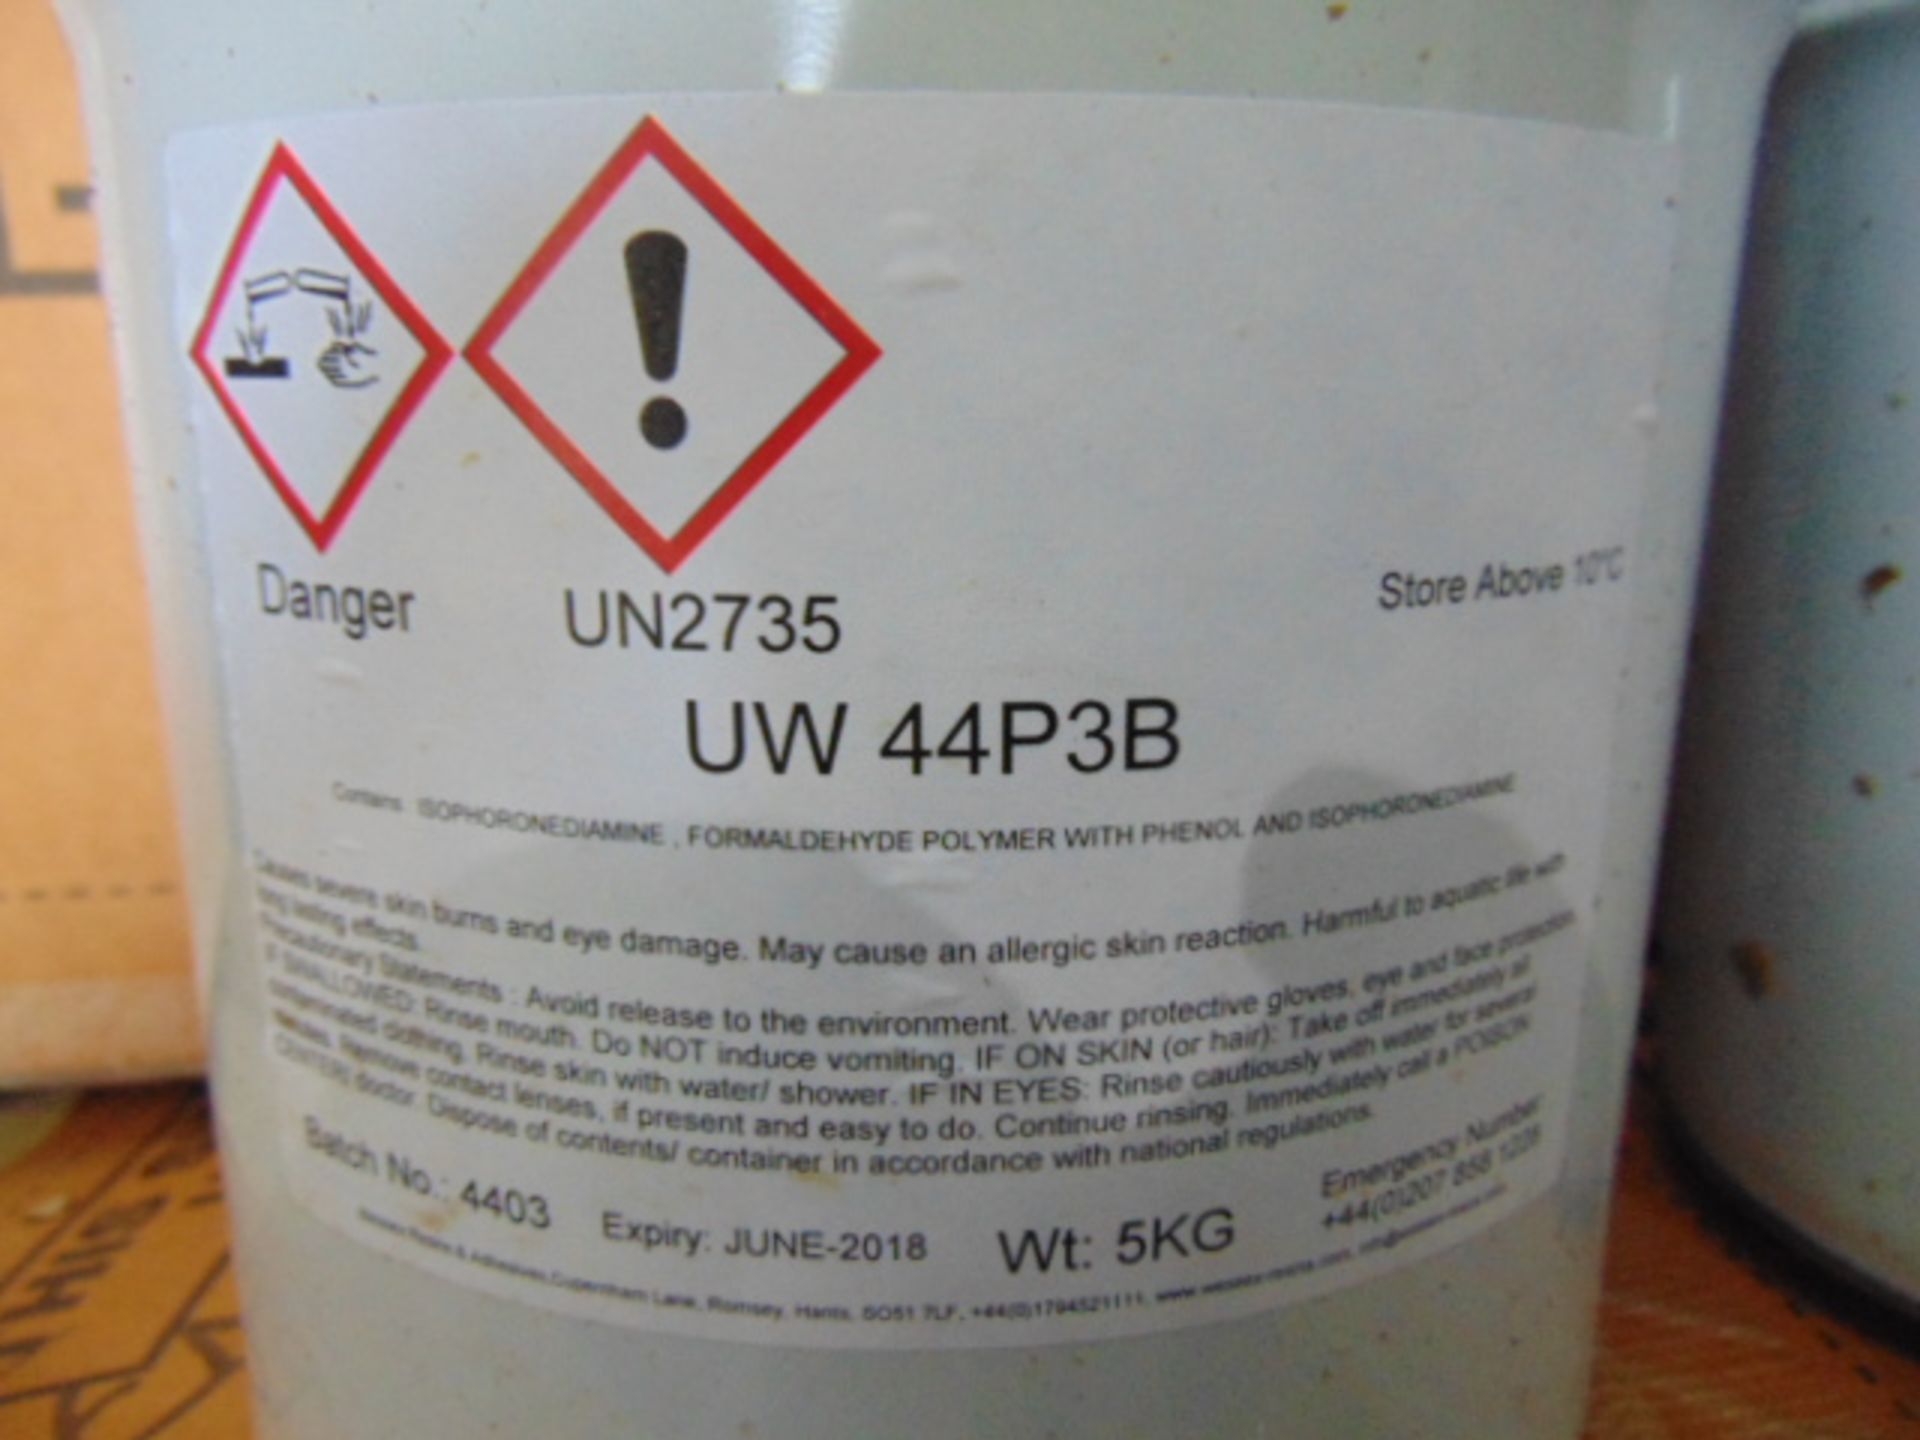 23 x Unissued Drums of UW 44P3 2 Pack Water Resistant Epoxy Resin - Image 3 of 4